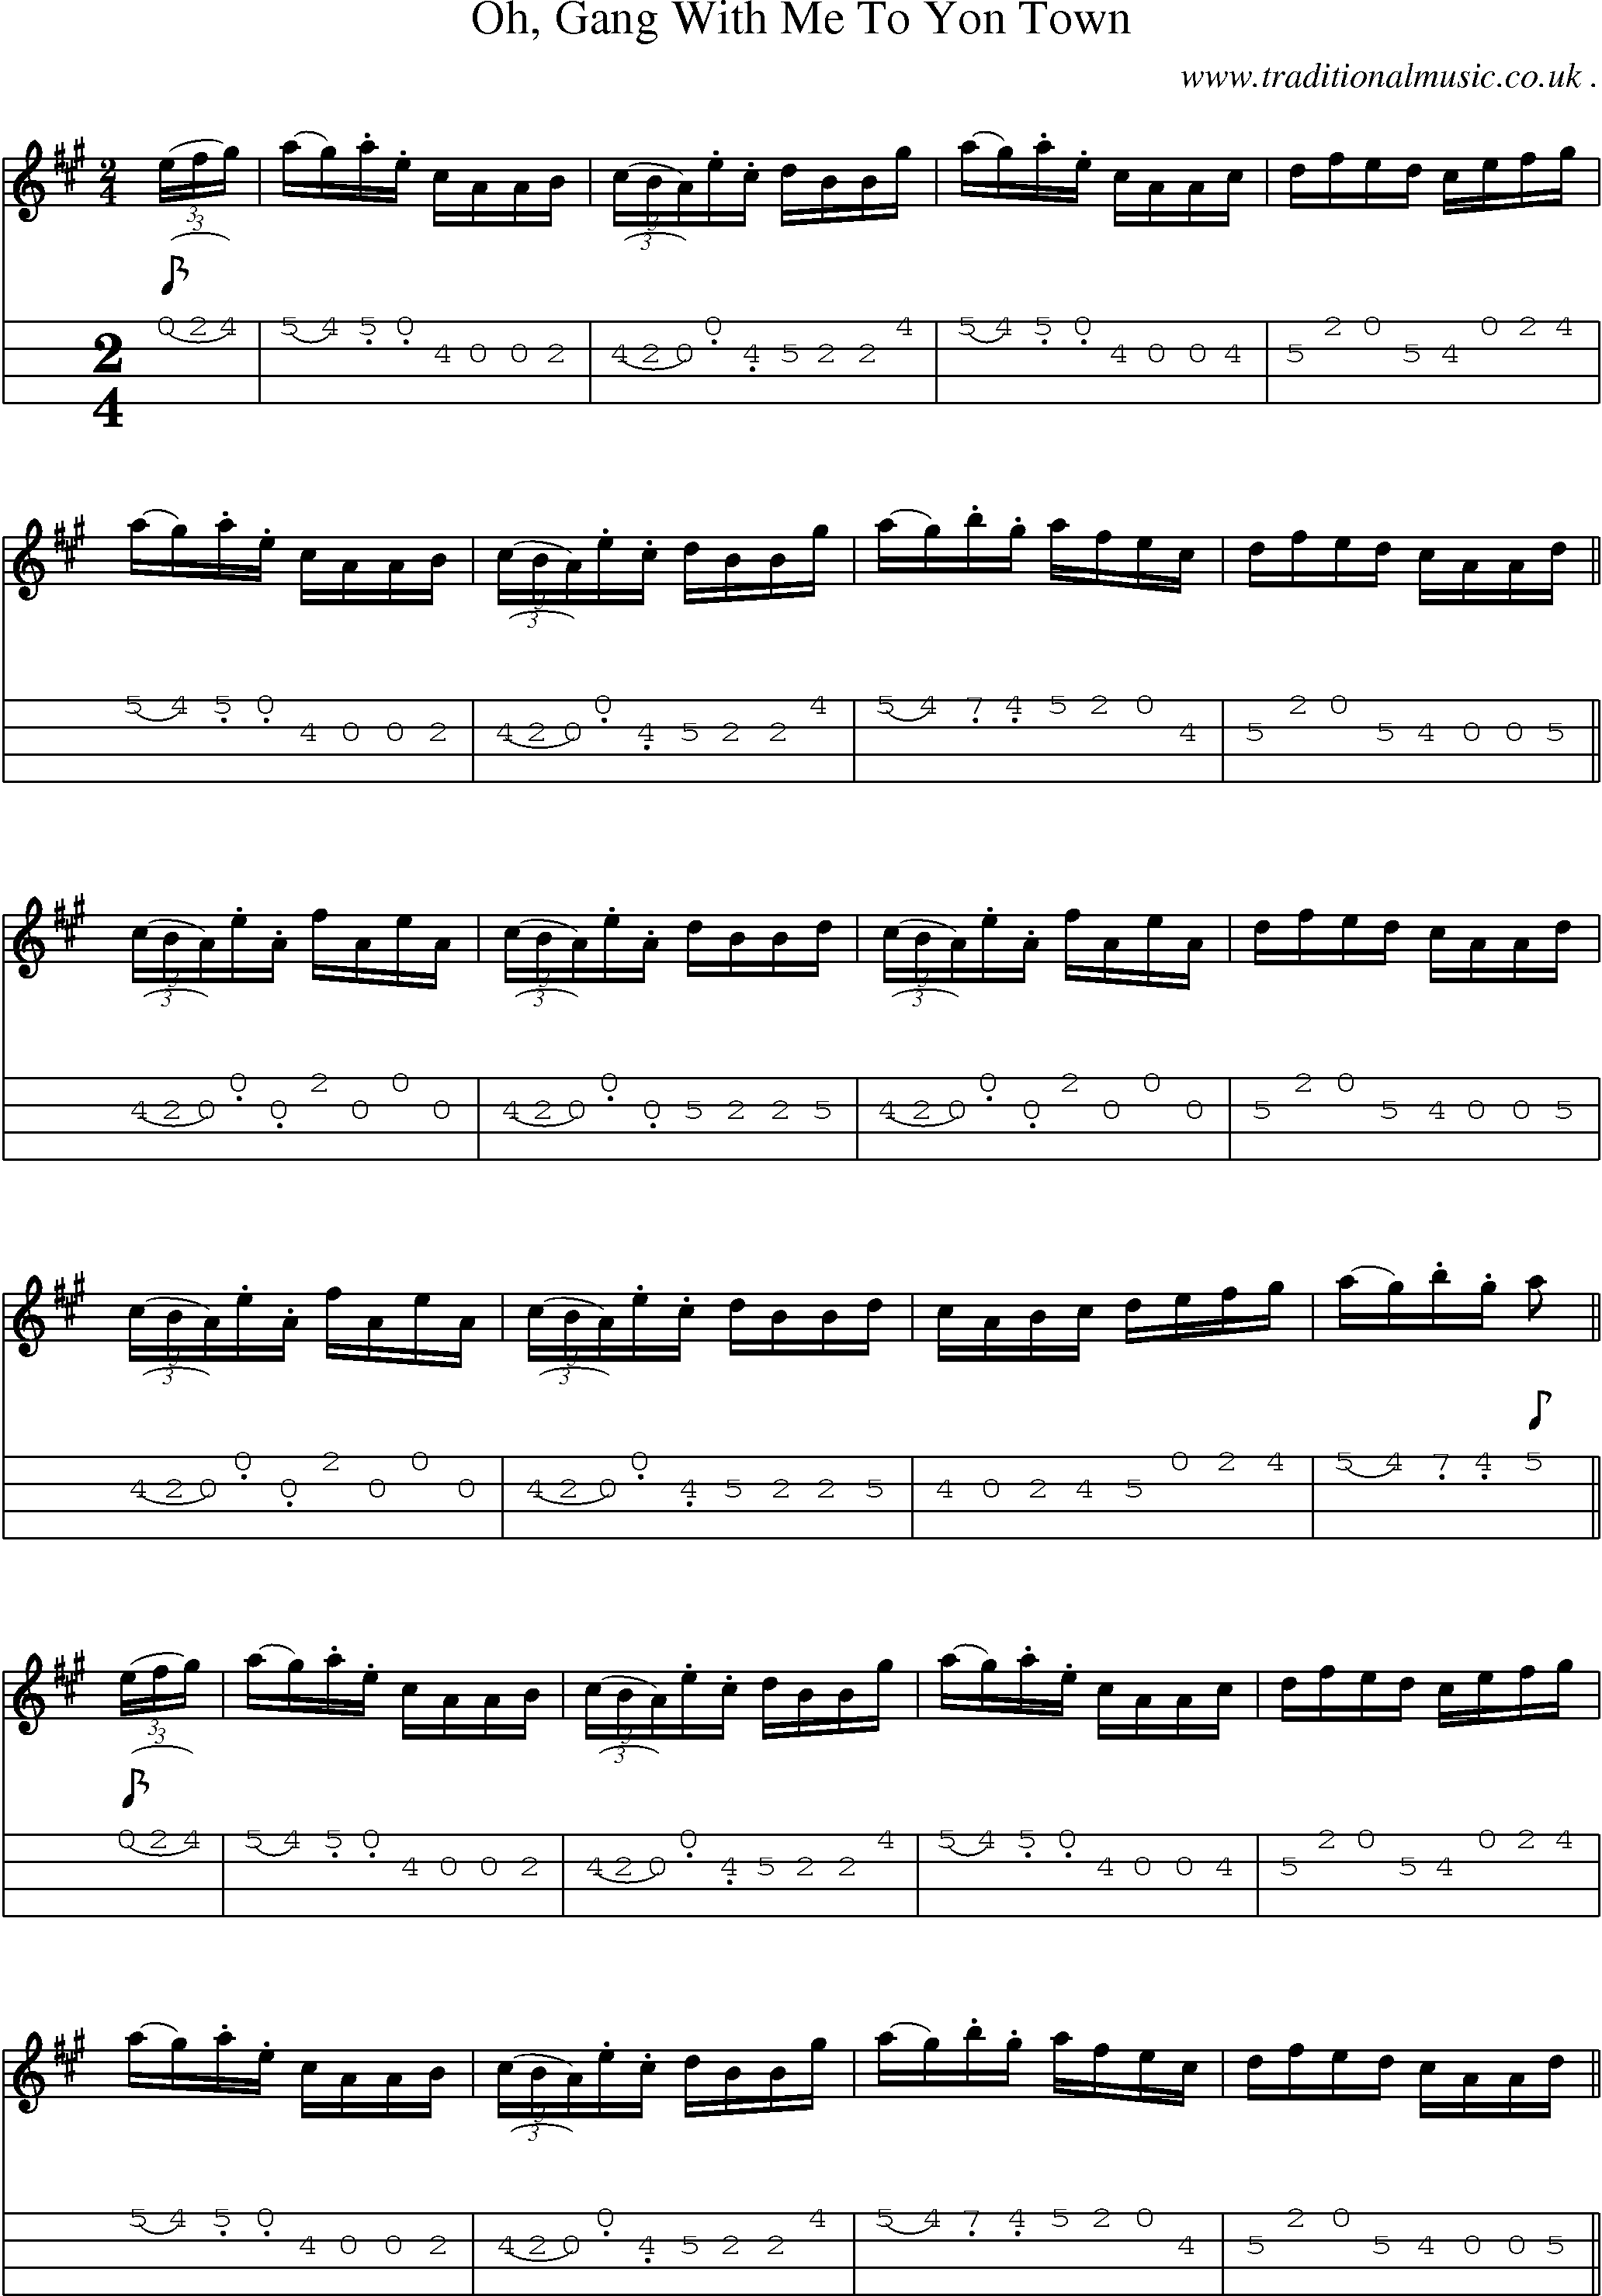 Sheet-Music and Mandolin Tabs for Oh Gang With Me To Yon Town